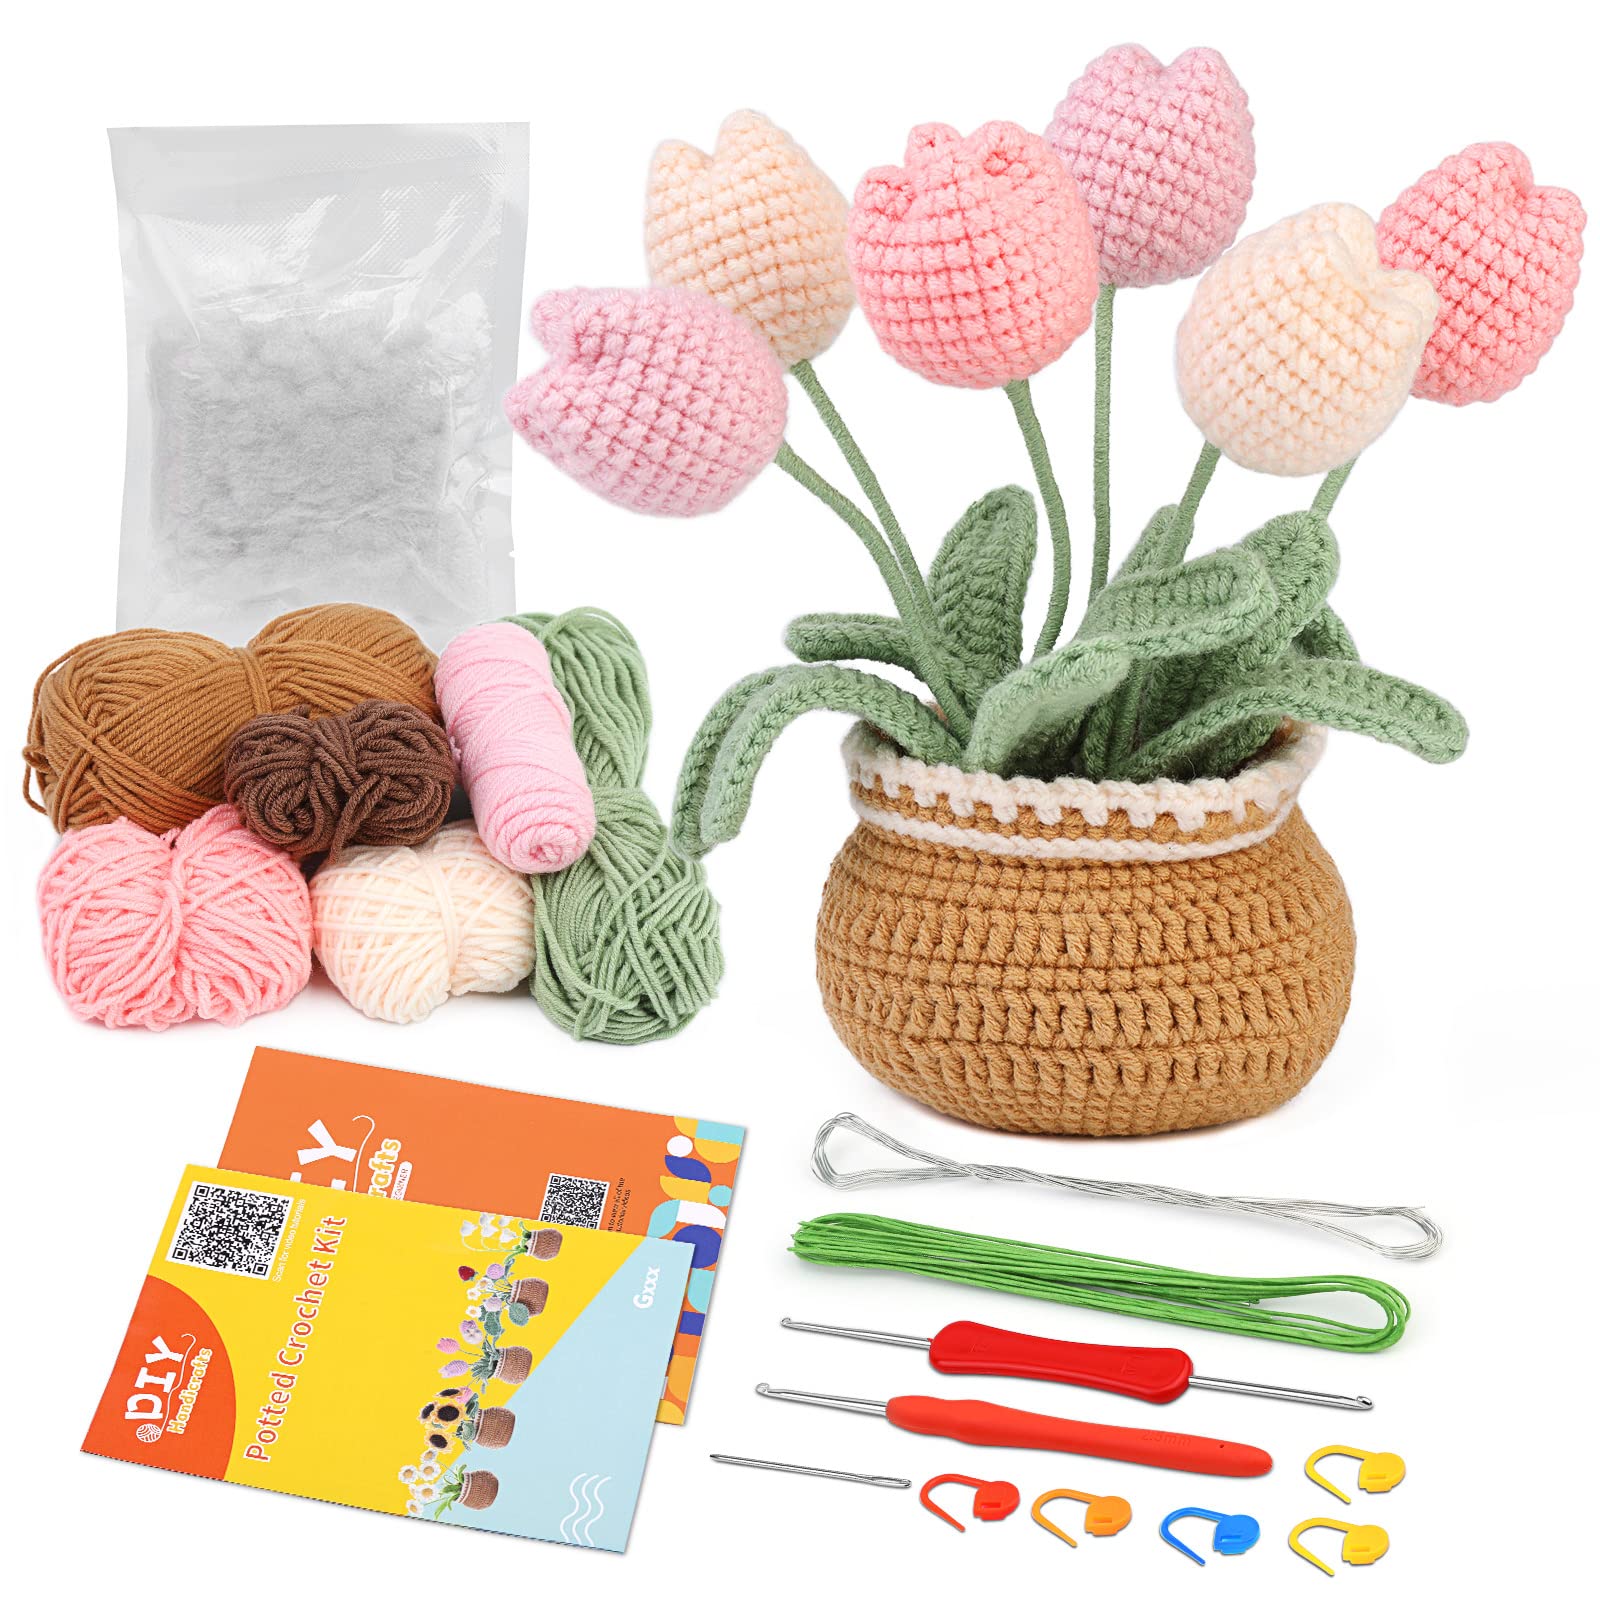 Crochet Kit for Beginners,1 Set Multicolored Potted Tulip Crochet Kits,with  Step-by-Step Video Tutorials,Beginner Crochet Starter Kit for Adults